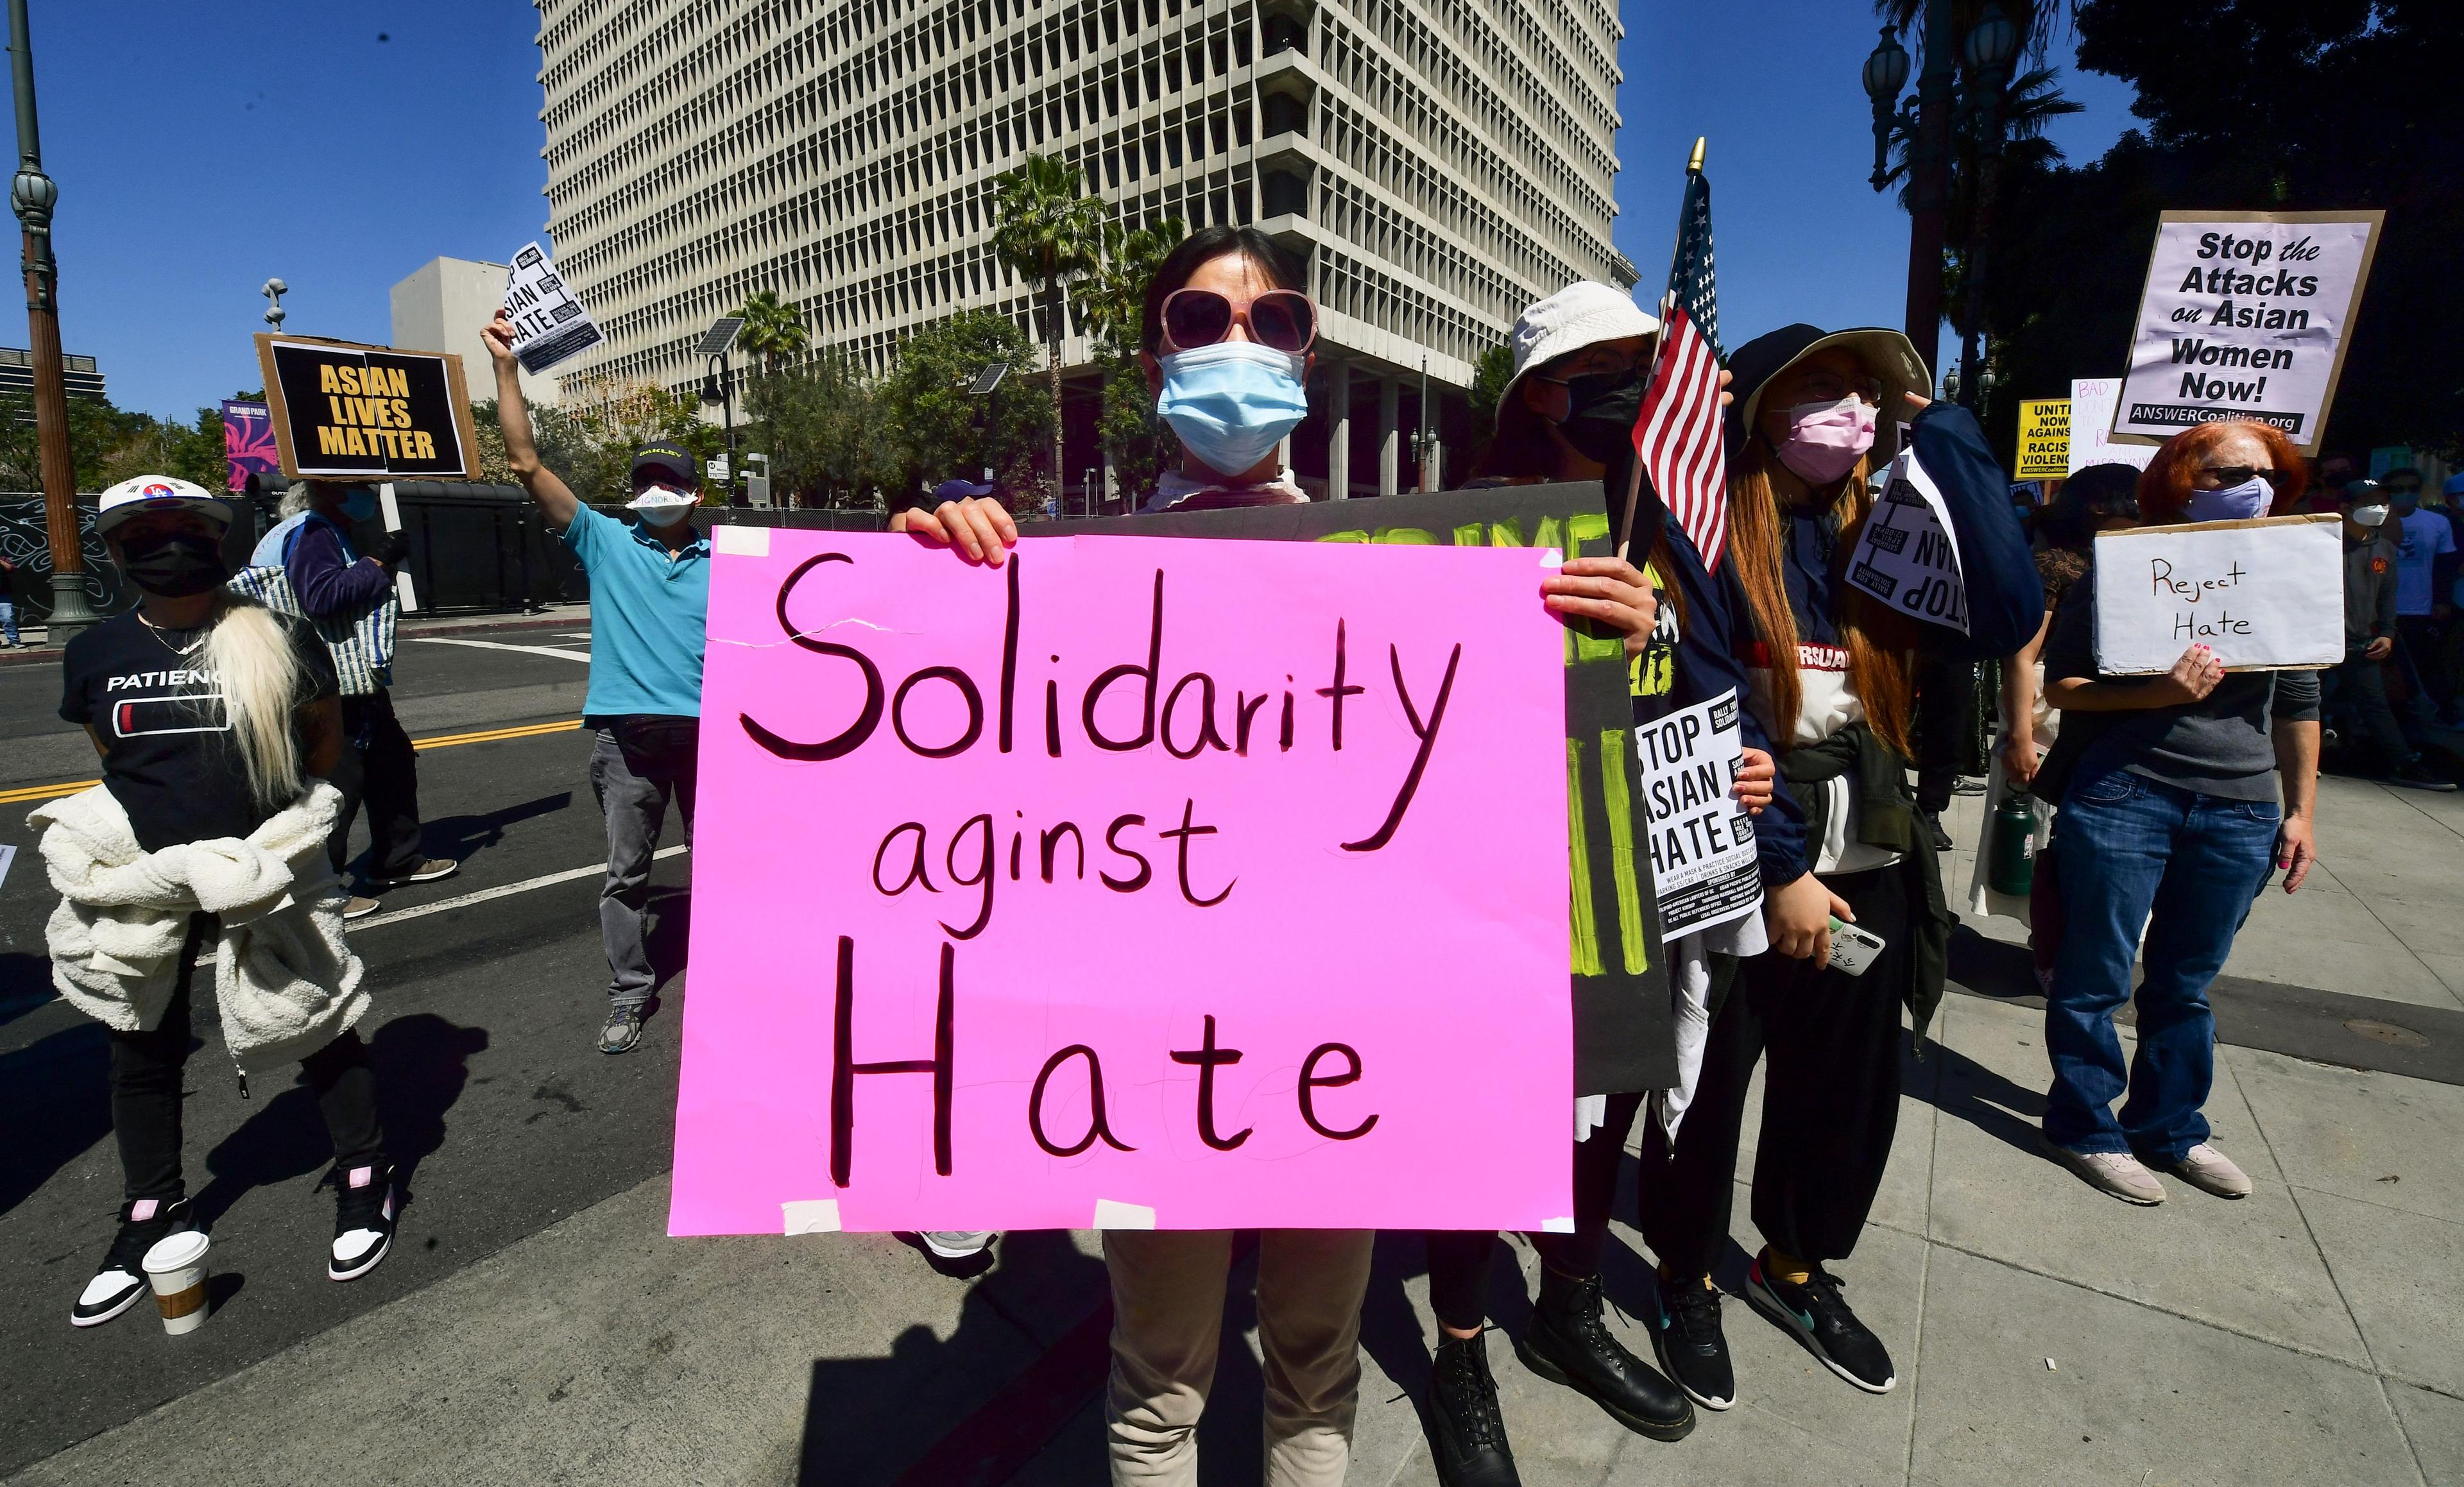 LAPD Announces ‘Hate Incident’ as New Category for Online Community Reporting